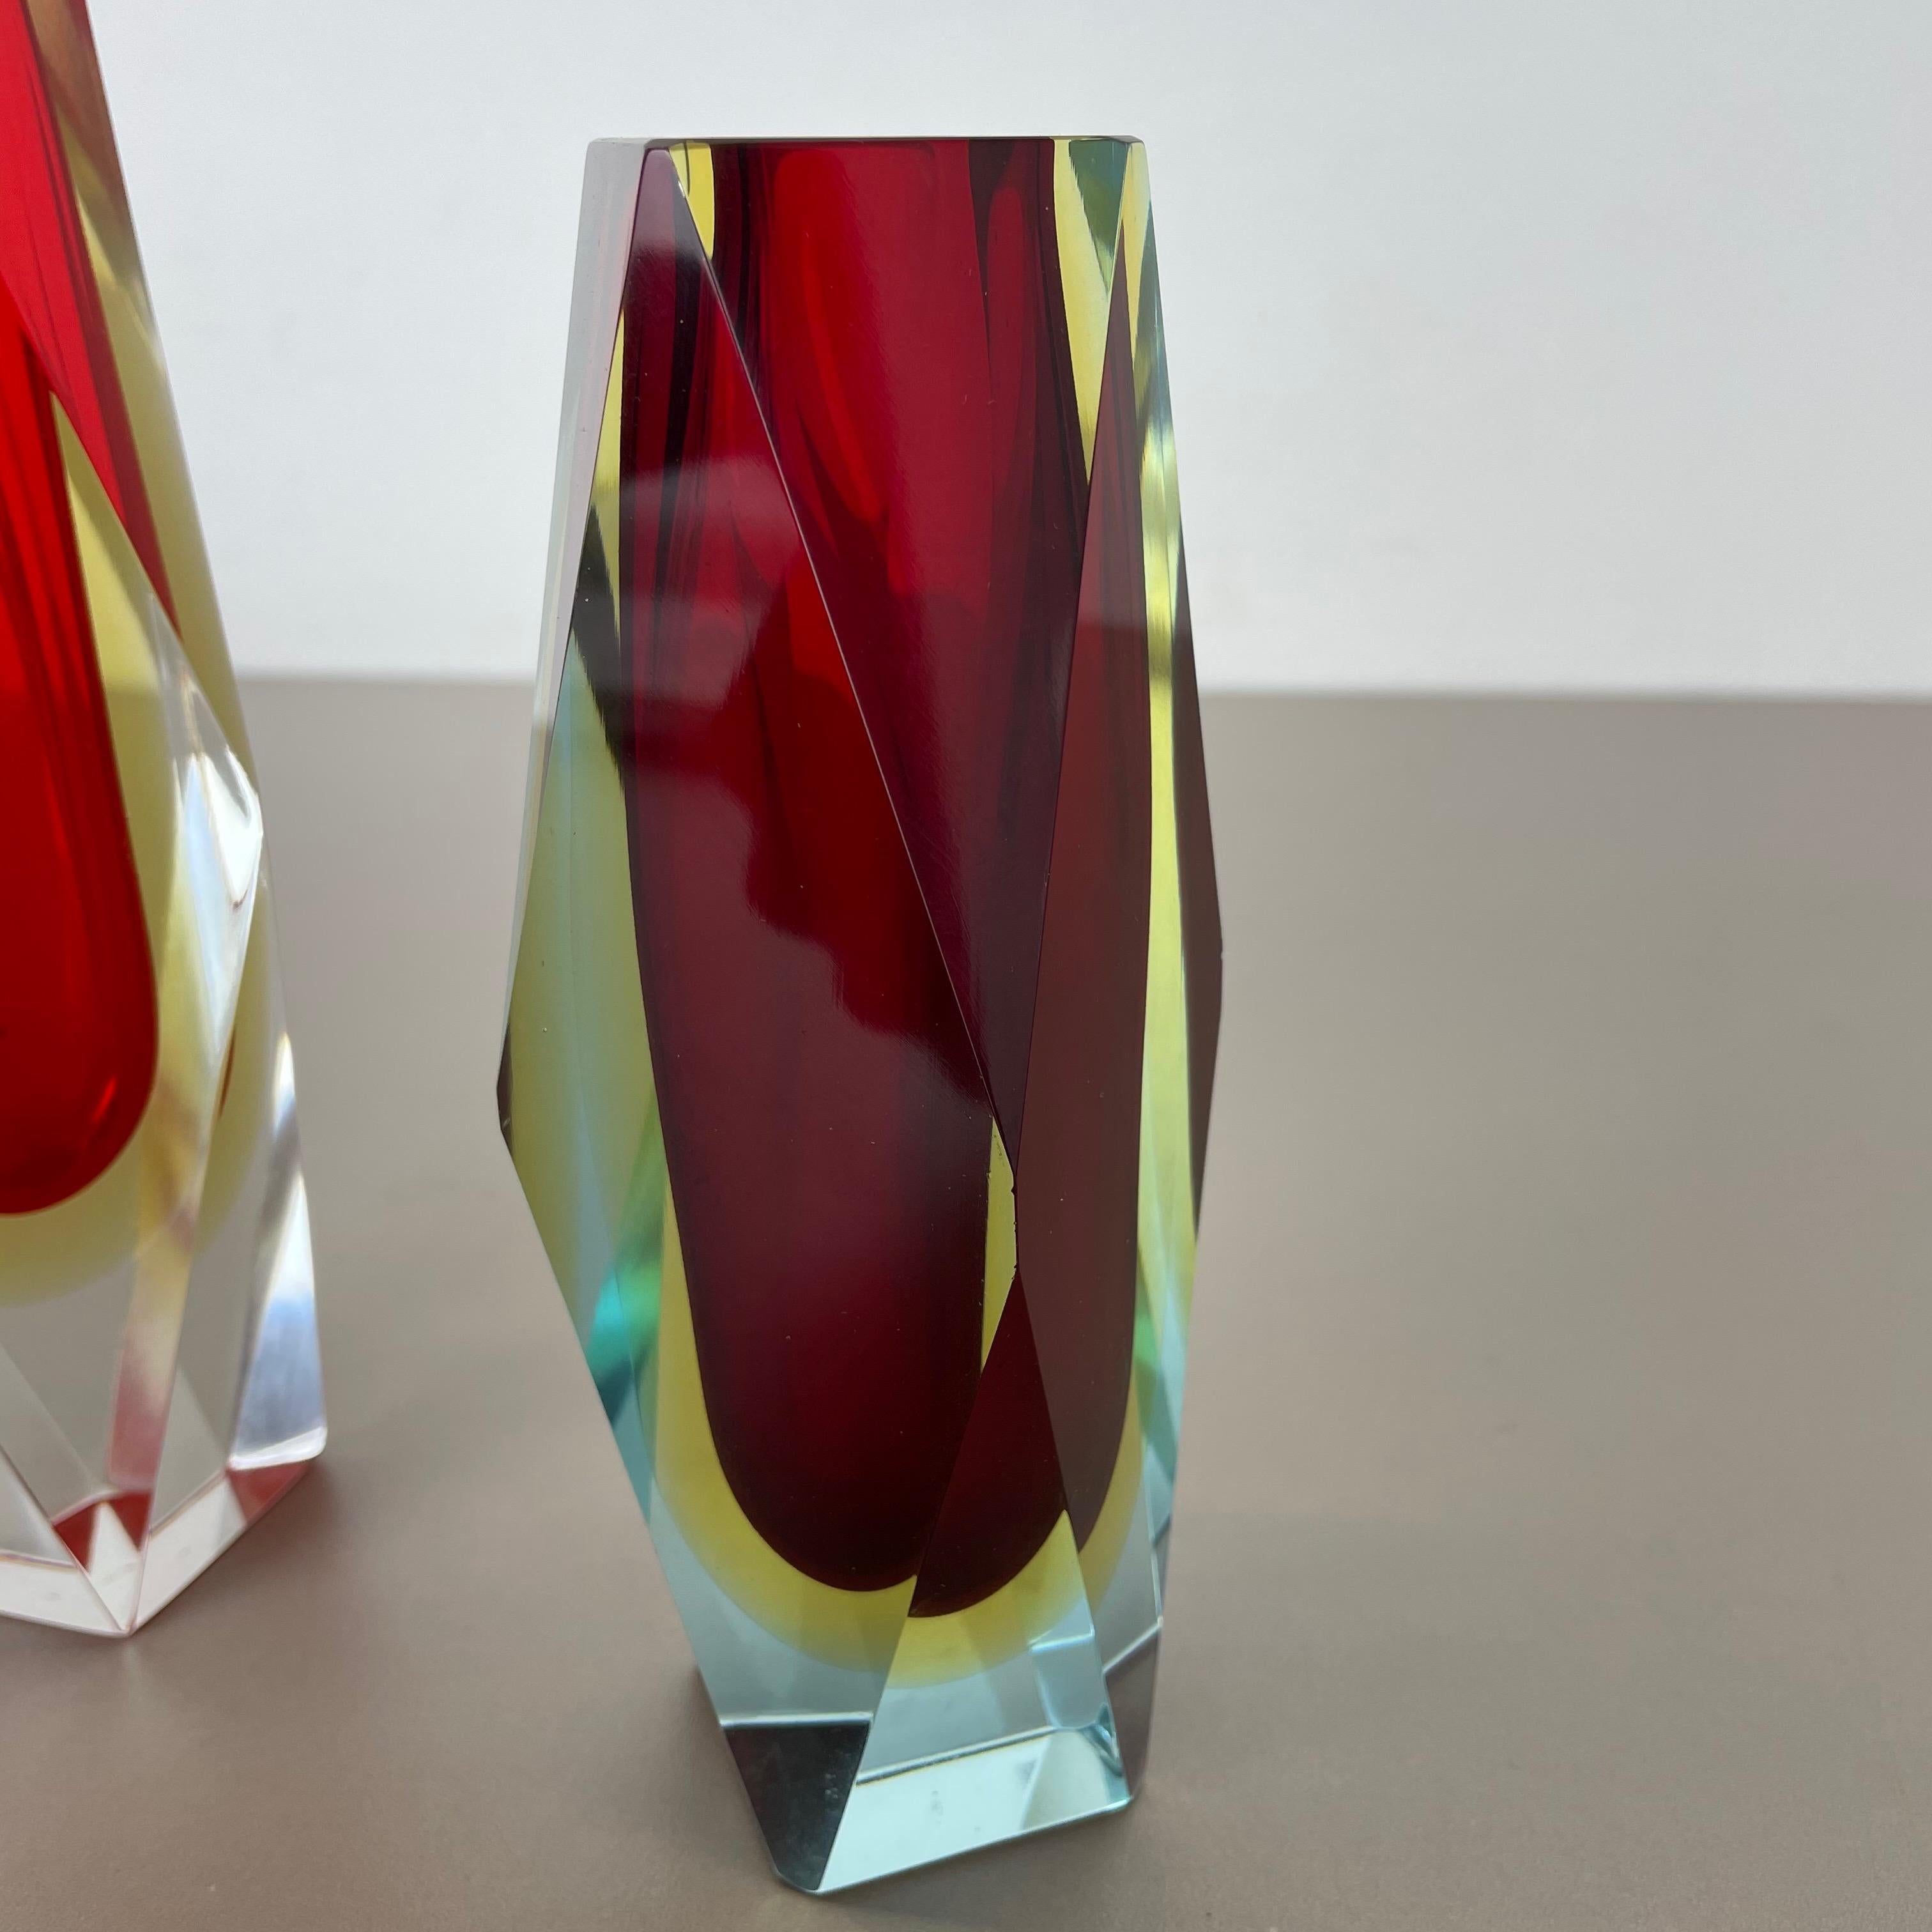 Set of 2 Faceted Murano Glass Sommerso Vase Designed by Flavio Poli Italy, 1970s For Sale 7